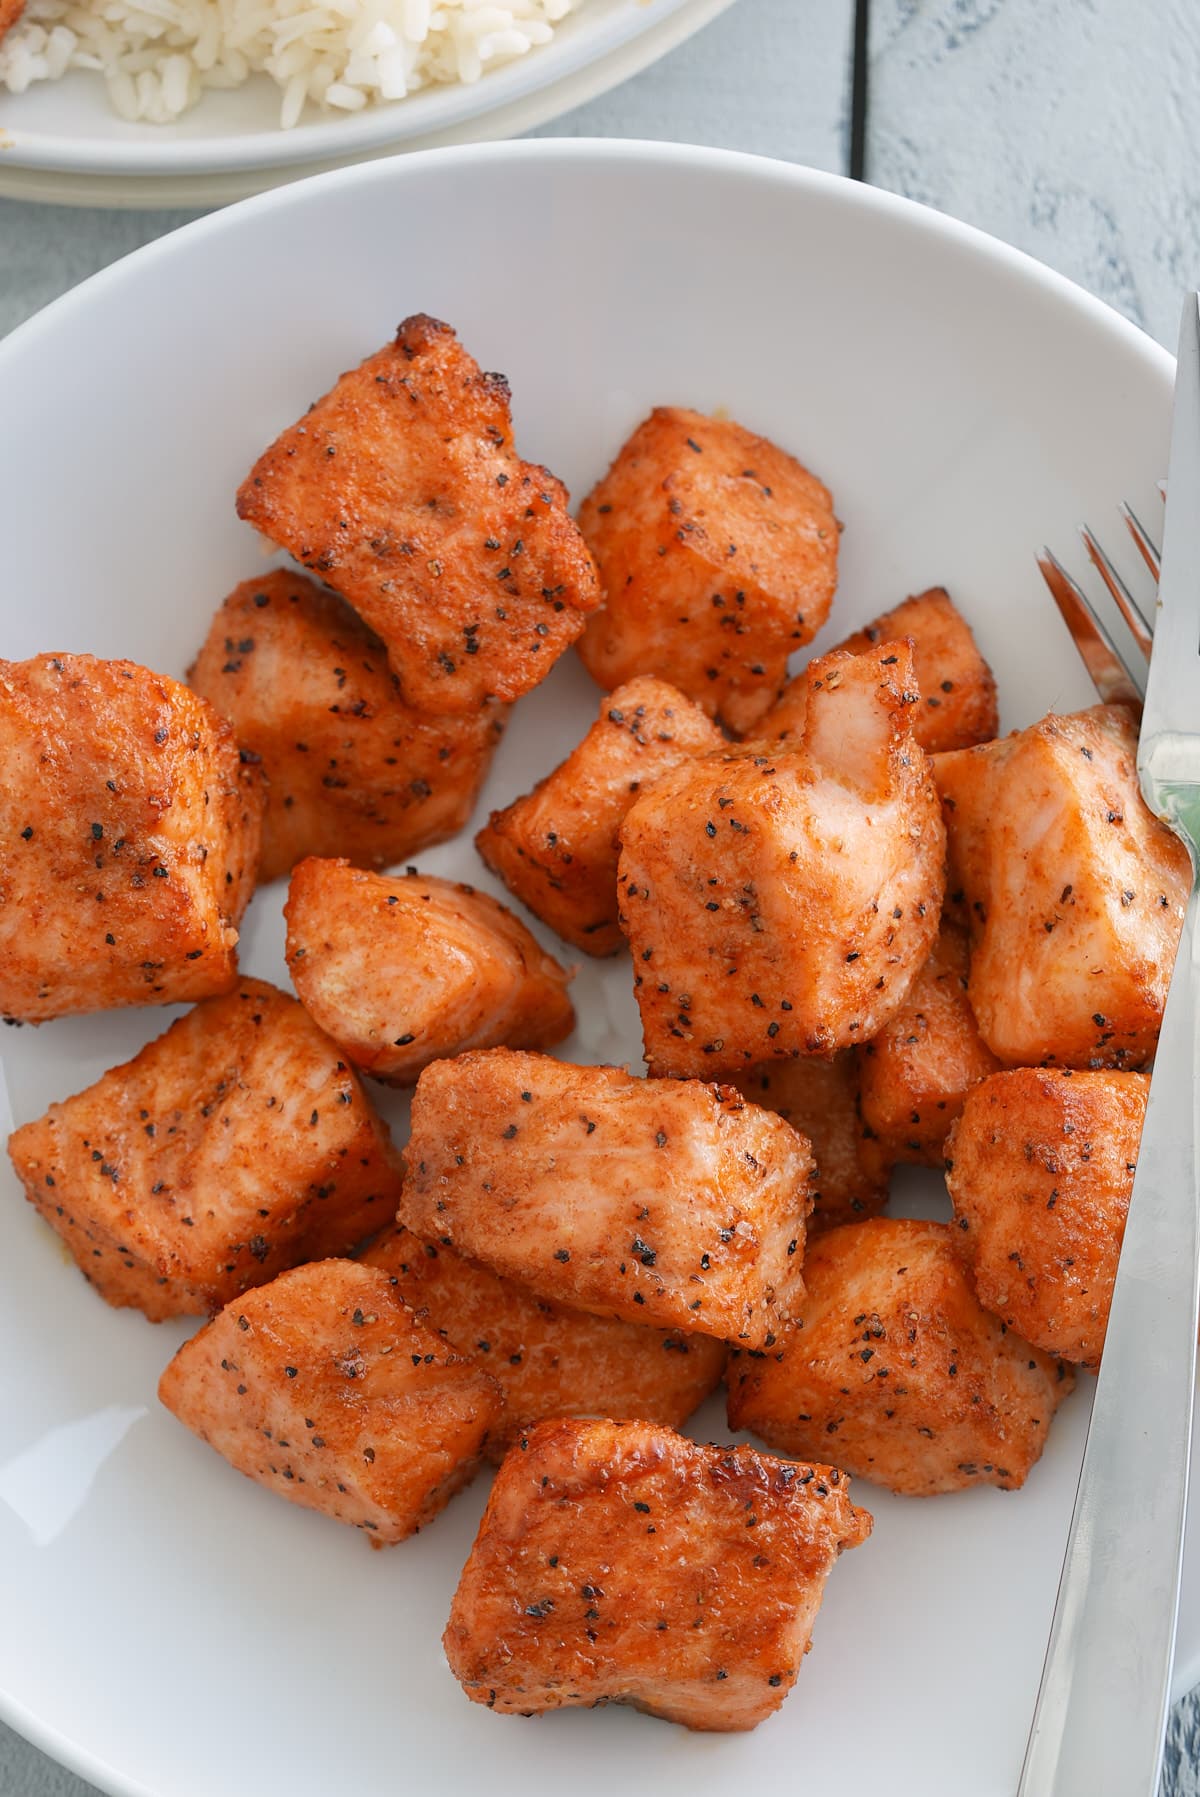 Cubes of cooked salmon coated in salmon seasoning.